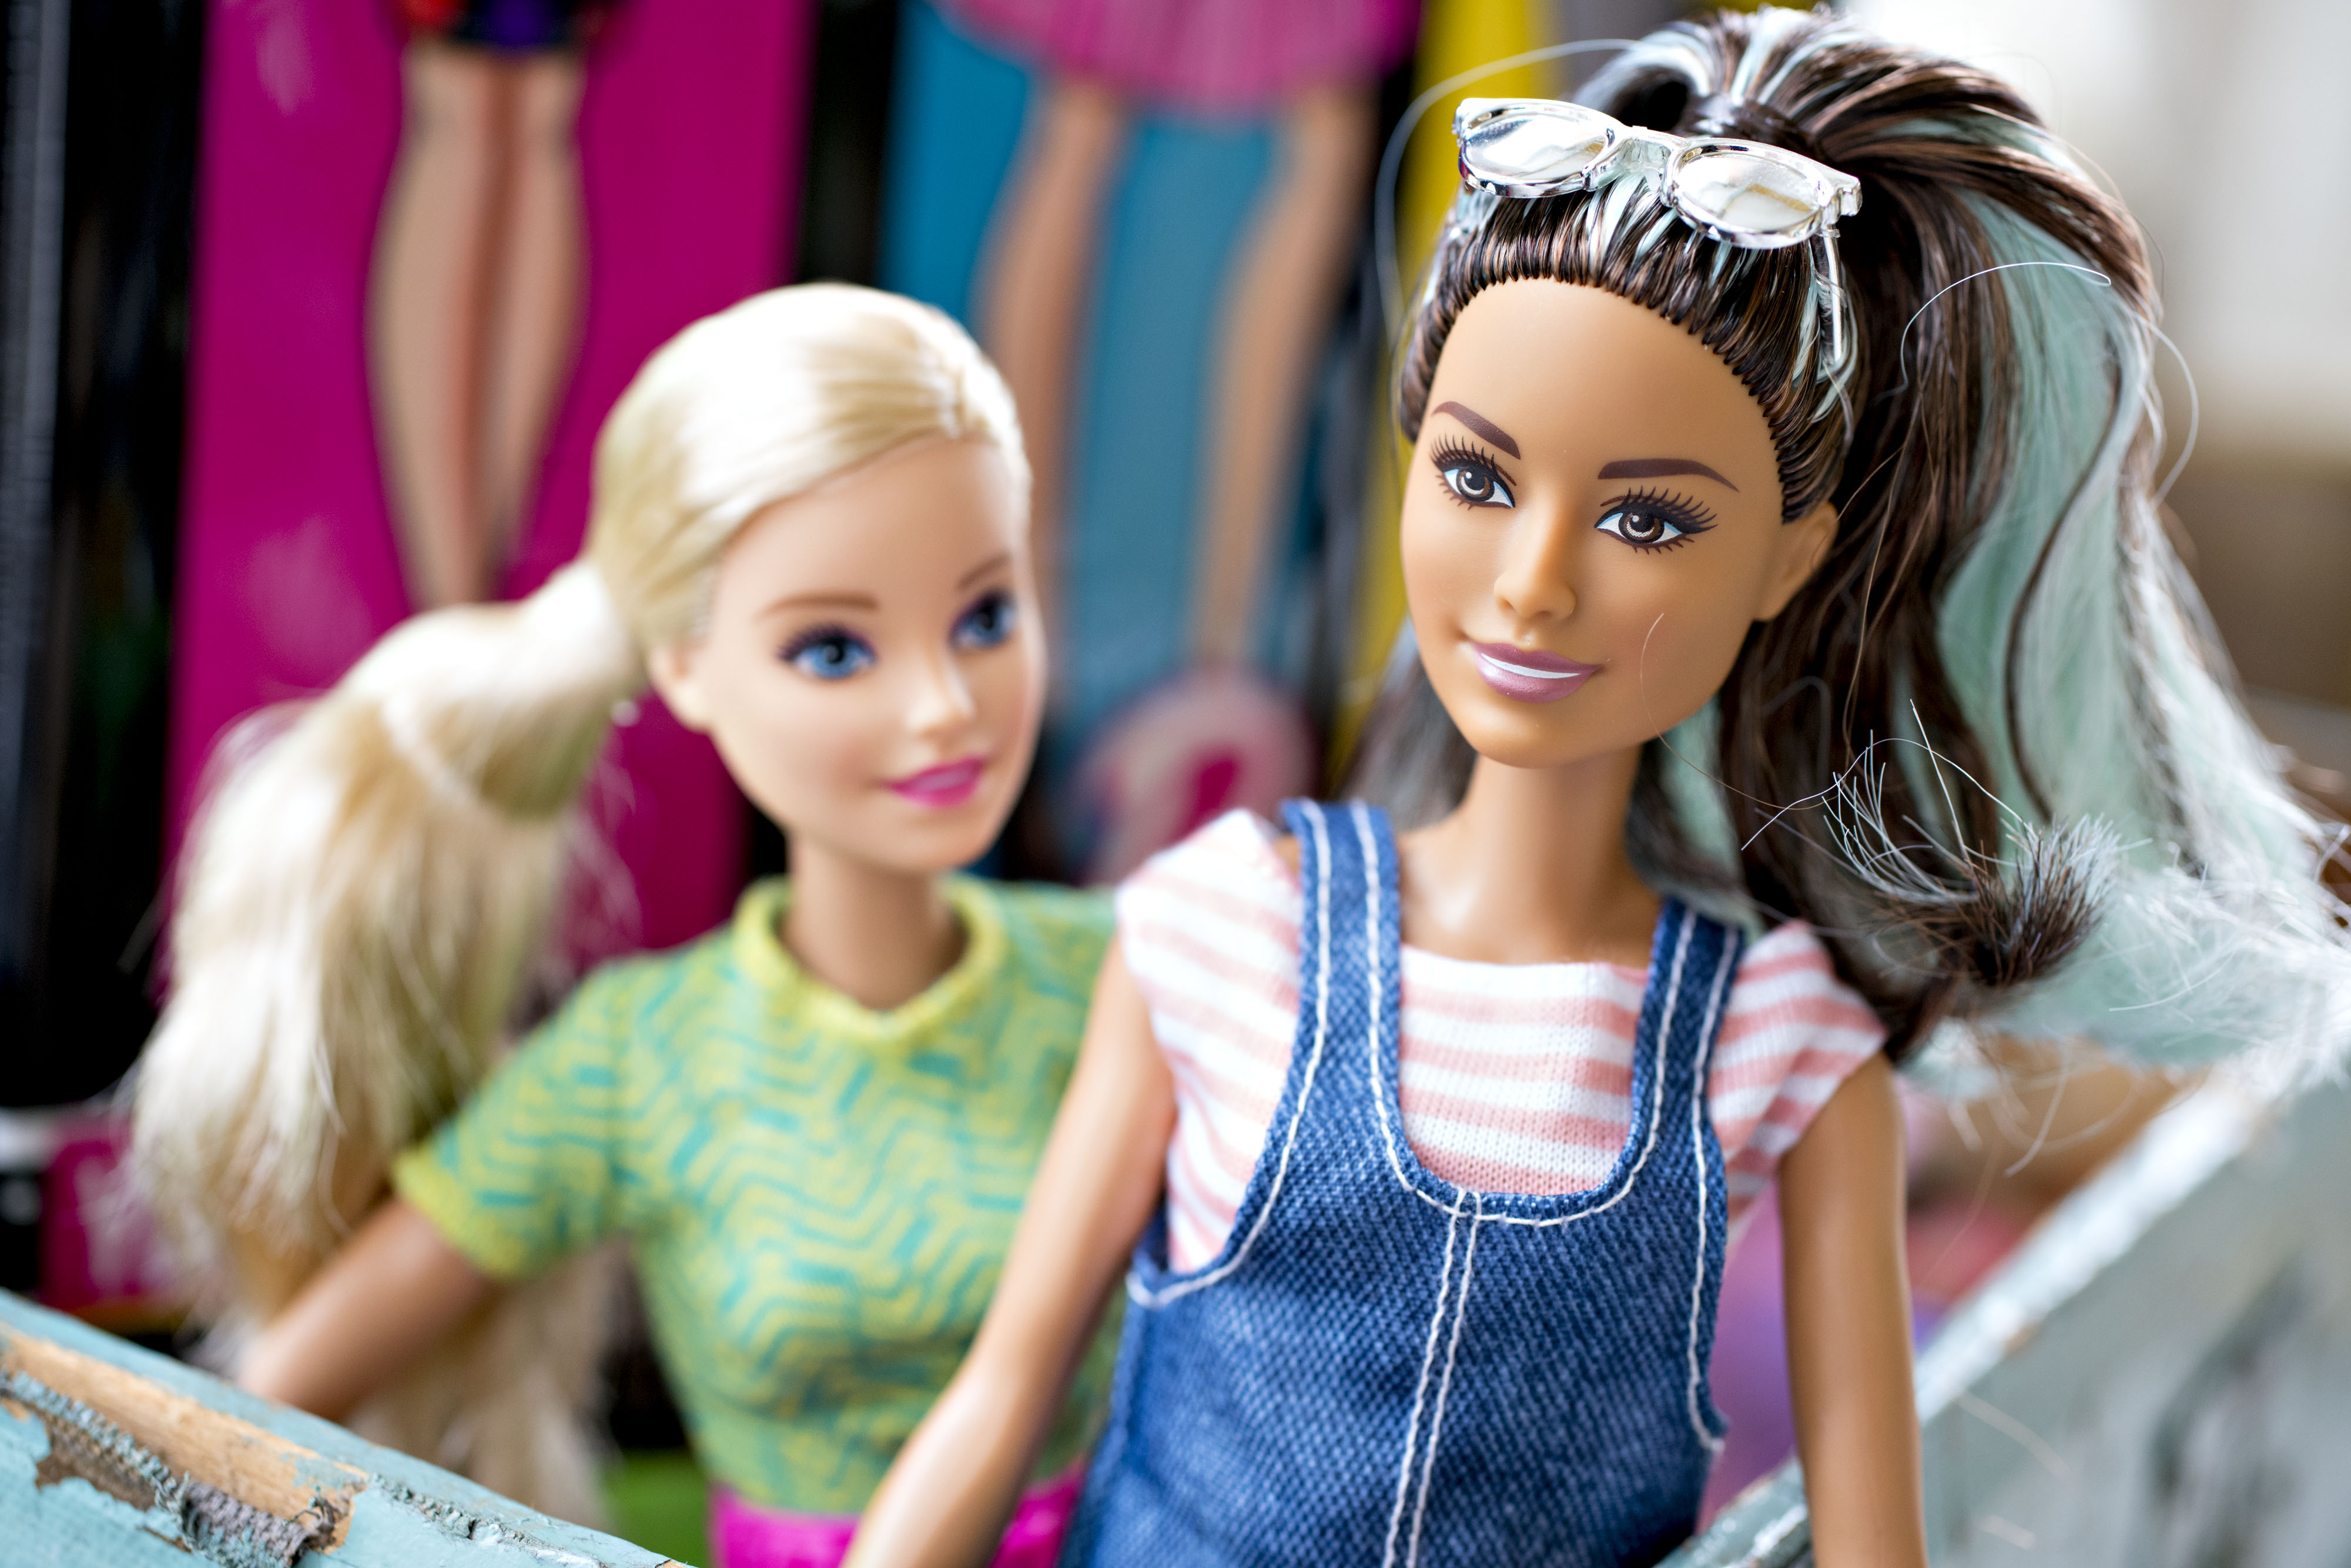 Barbie Dolls: Sales Are Booming for Mattel (MAT) During Covid-19 Pandemic -  Bloomberg